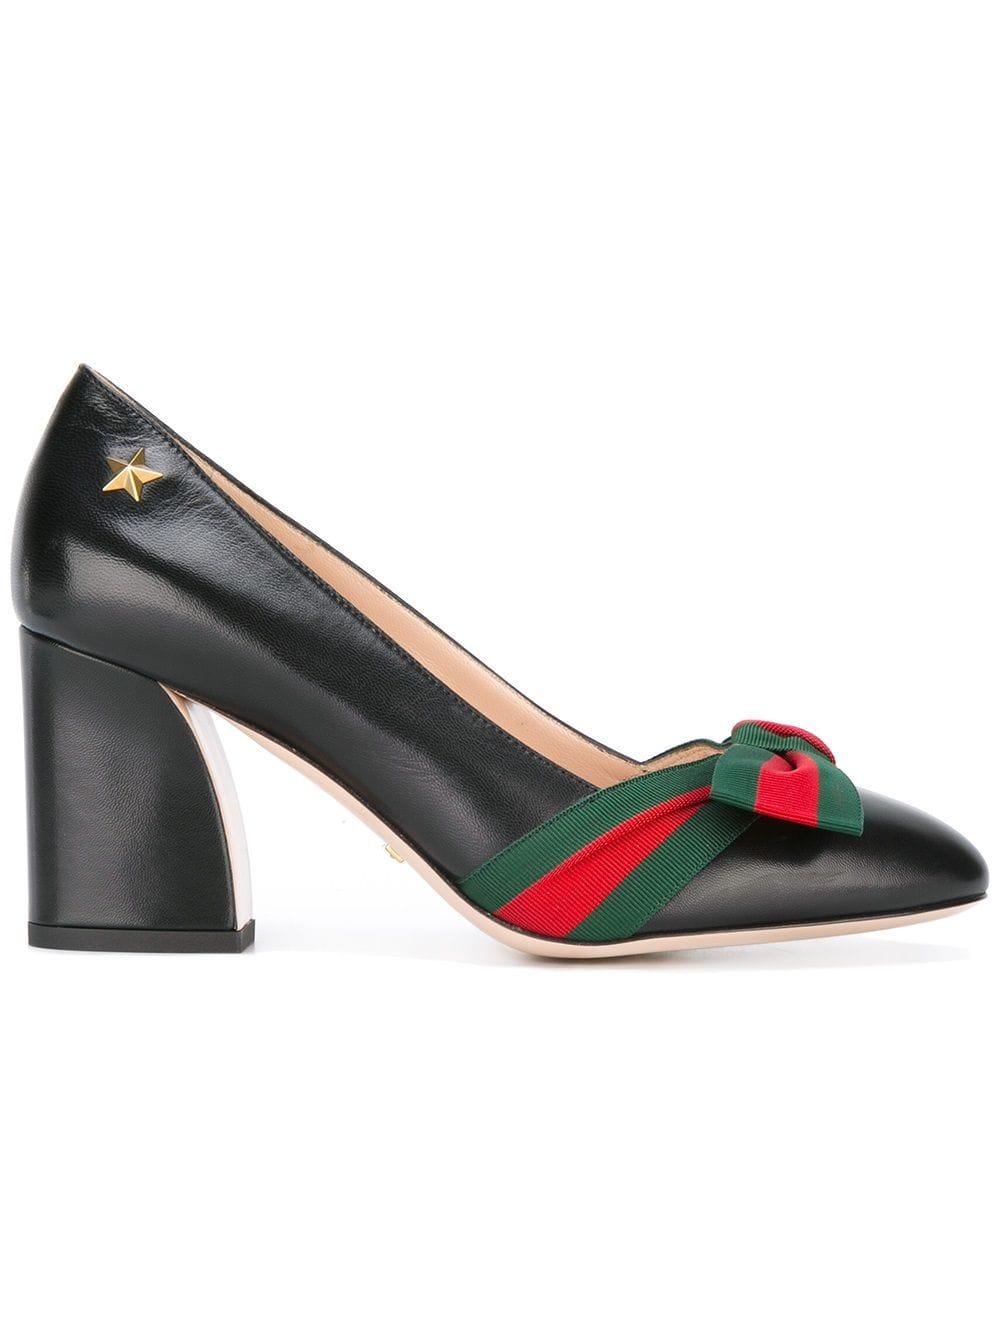 Gucci Leather Web Pumps in -